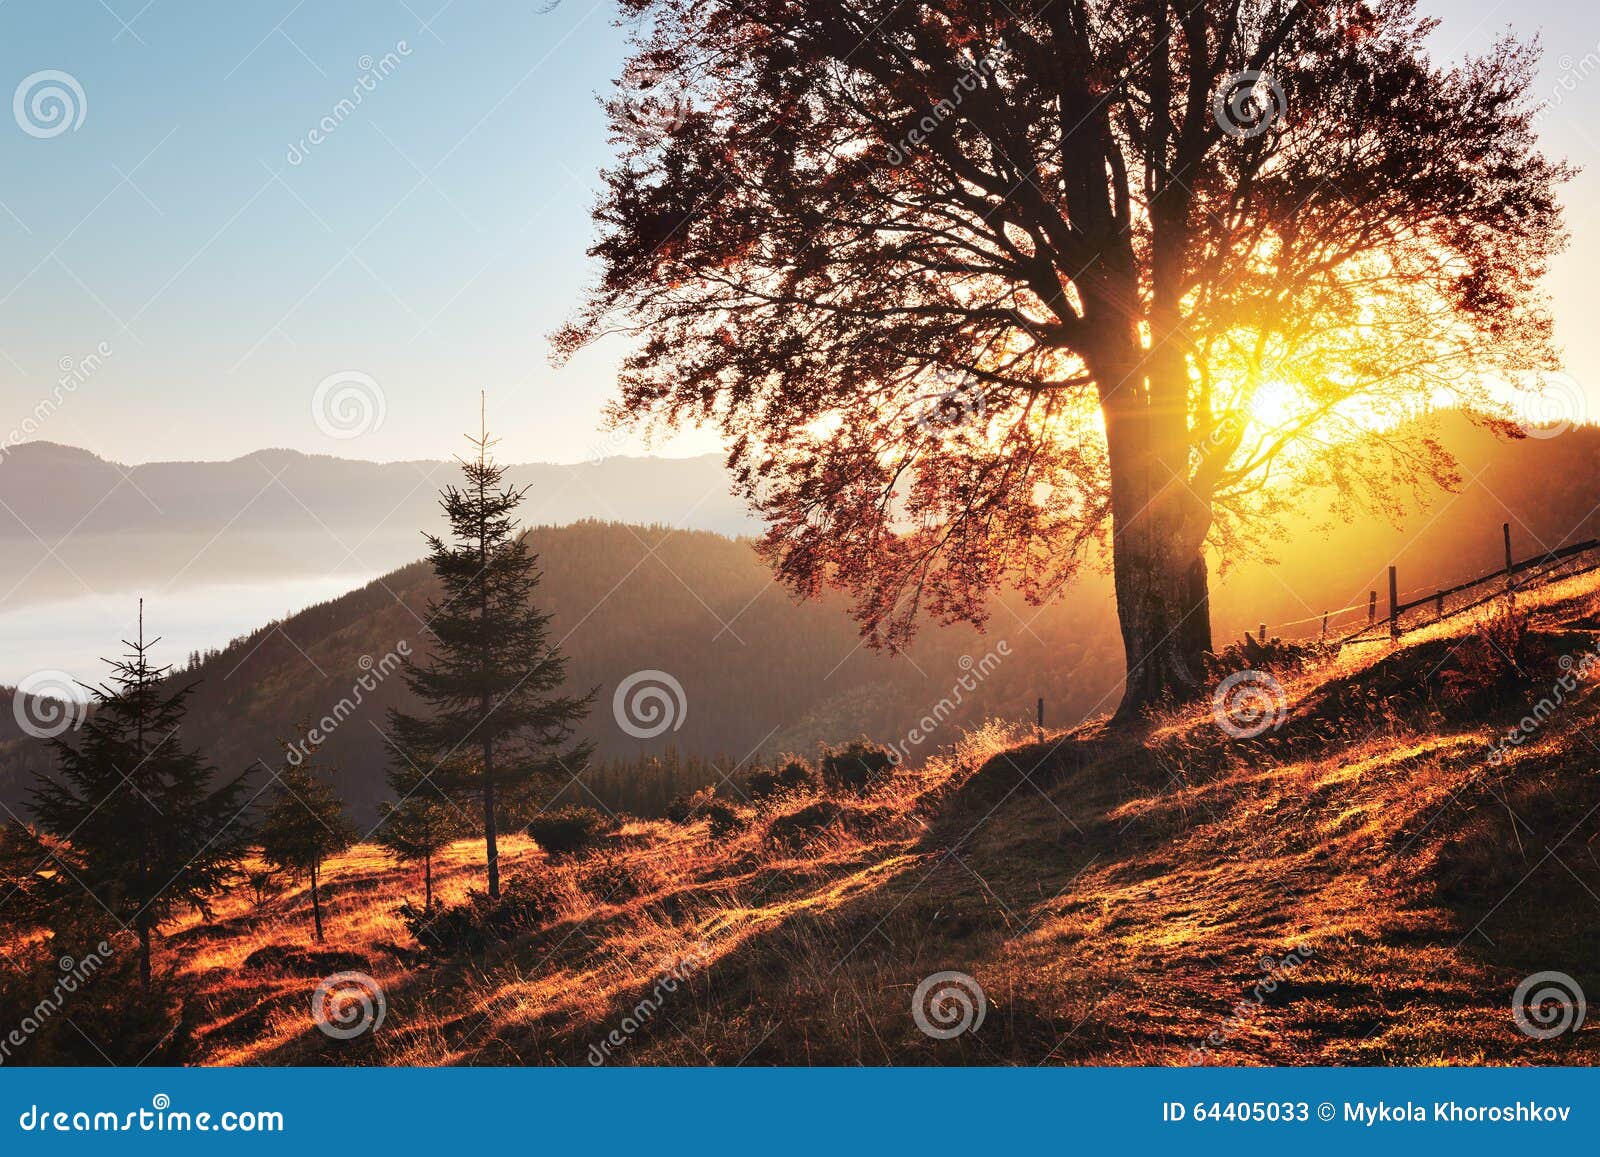 Fall colors tree stock image. Image of park, fall, morning - 64405033